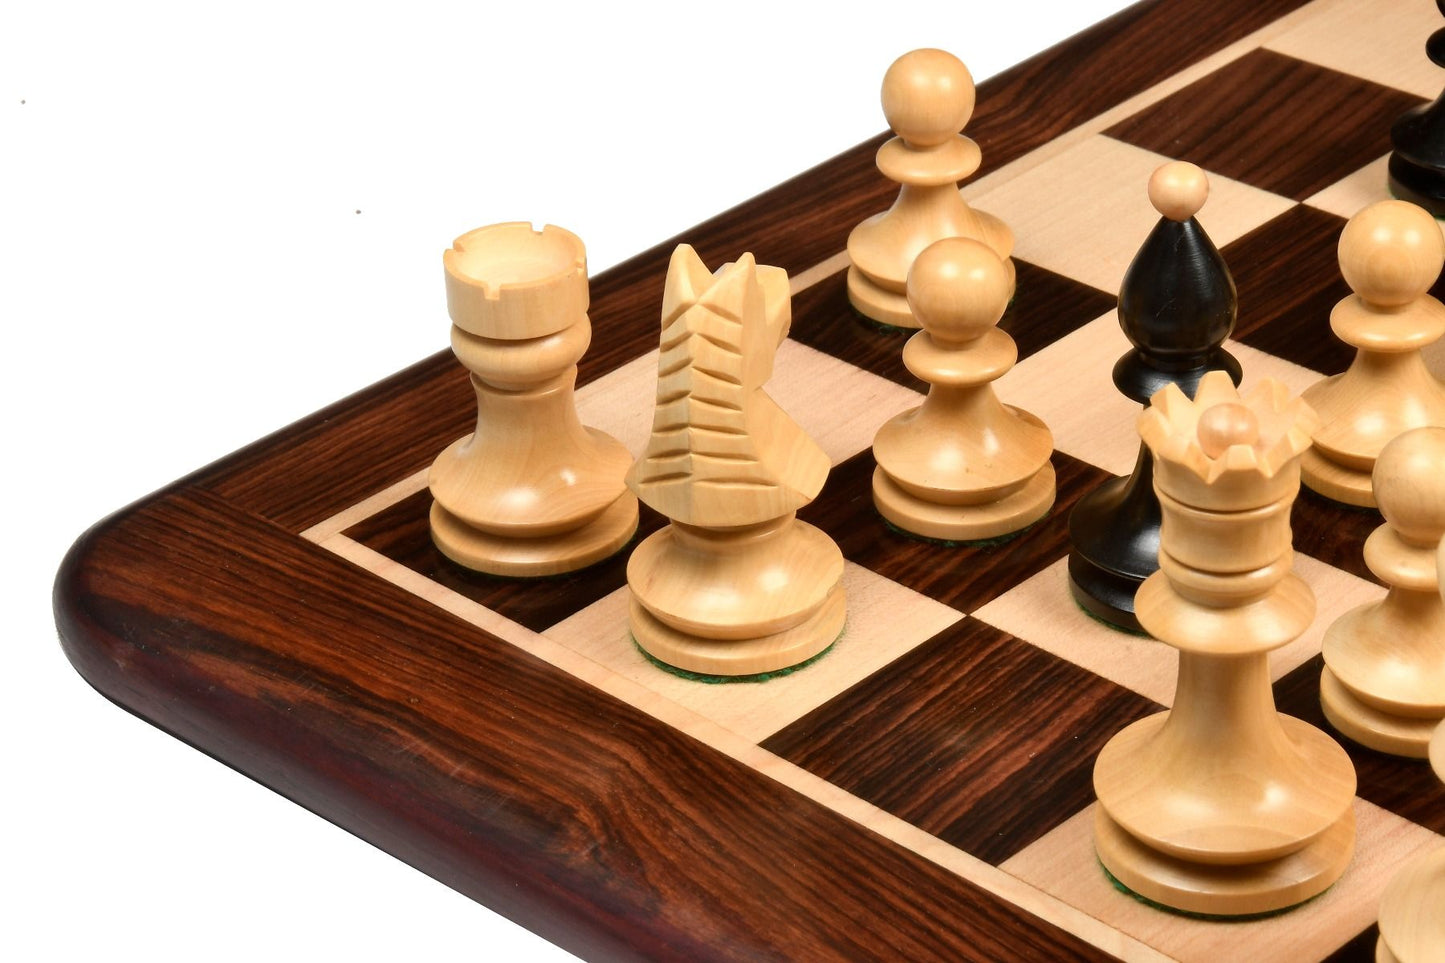 COMBO OF REPRODUCED ROMANIAN-HUNGARIAN NATIONAL TOURNAMENT CHESS PIECES IN EBONIZED & NATURAL BOXWOOD - 3.8" KING WITH WOODEN ROSEWOOD CHESS BOARD - 20"